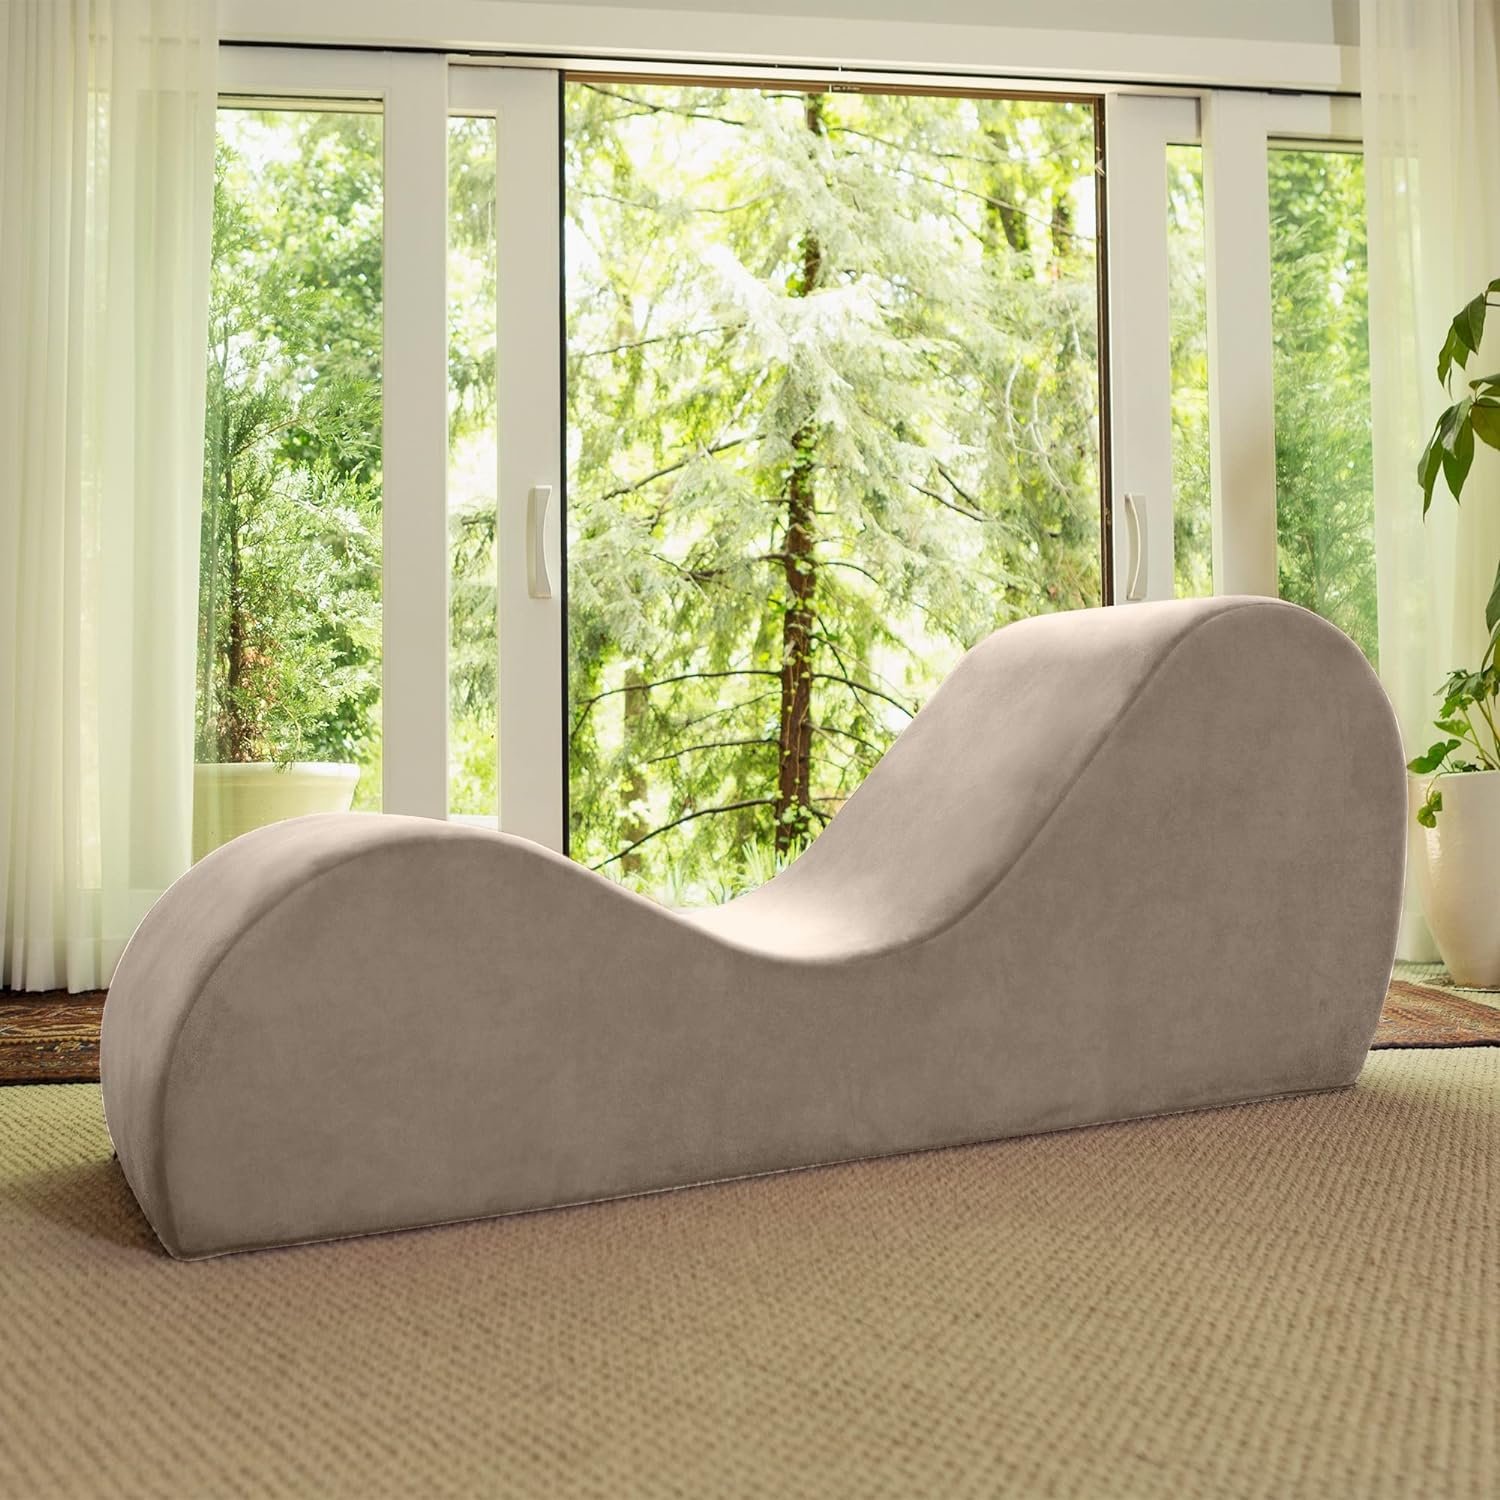 Avana Sleek Chaise Lounge for Yoga-Made in The USA-for Stretching, Relaxation, Exercise  More, 60D x 18W x 26H Inch, Beige